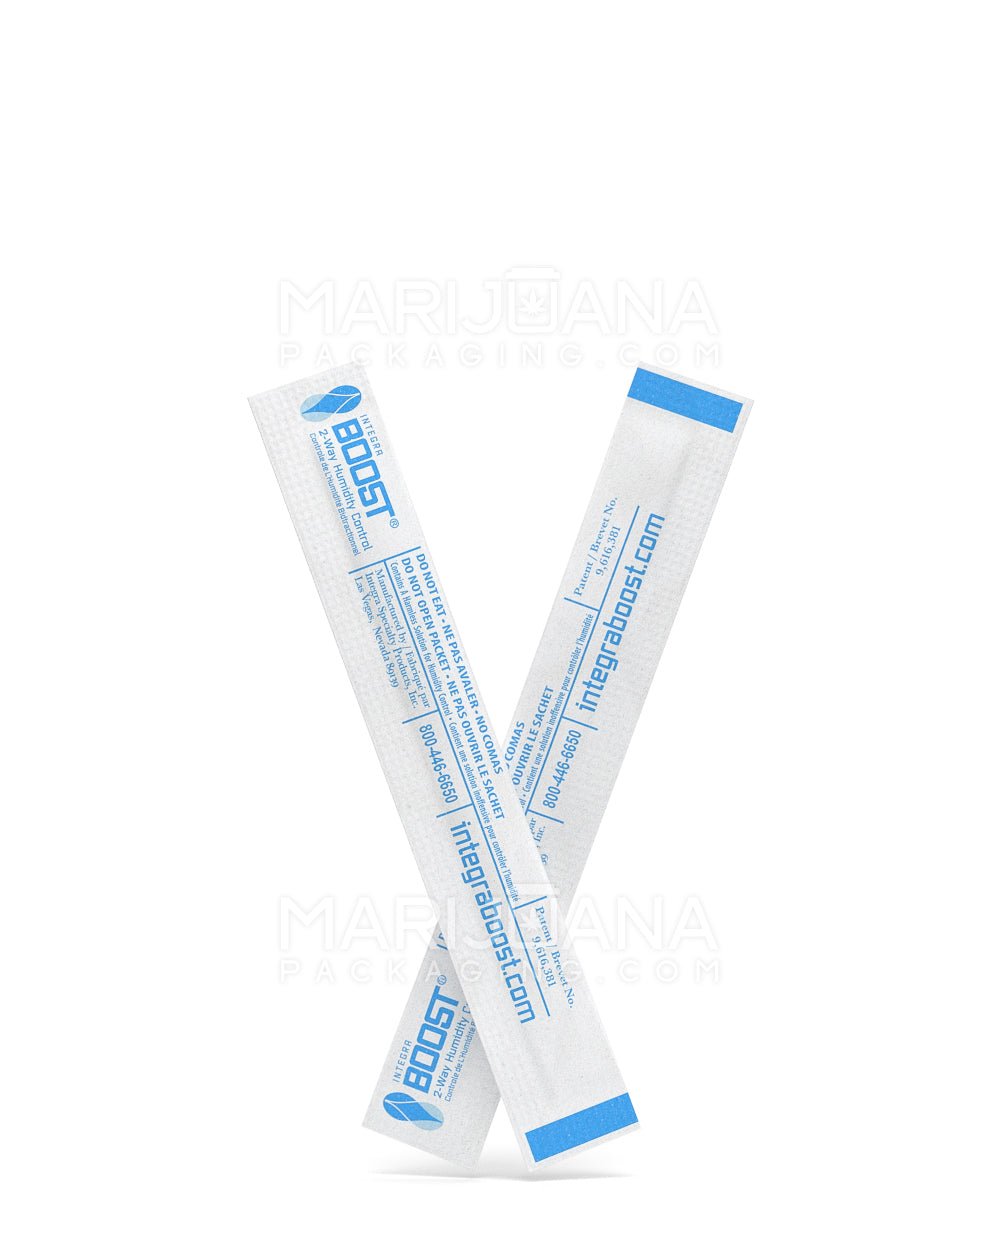 INTEGRA | Boost Pre-Roll Humidity Packs | 80mm - 62% - 100 Count - 3